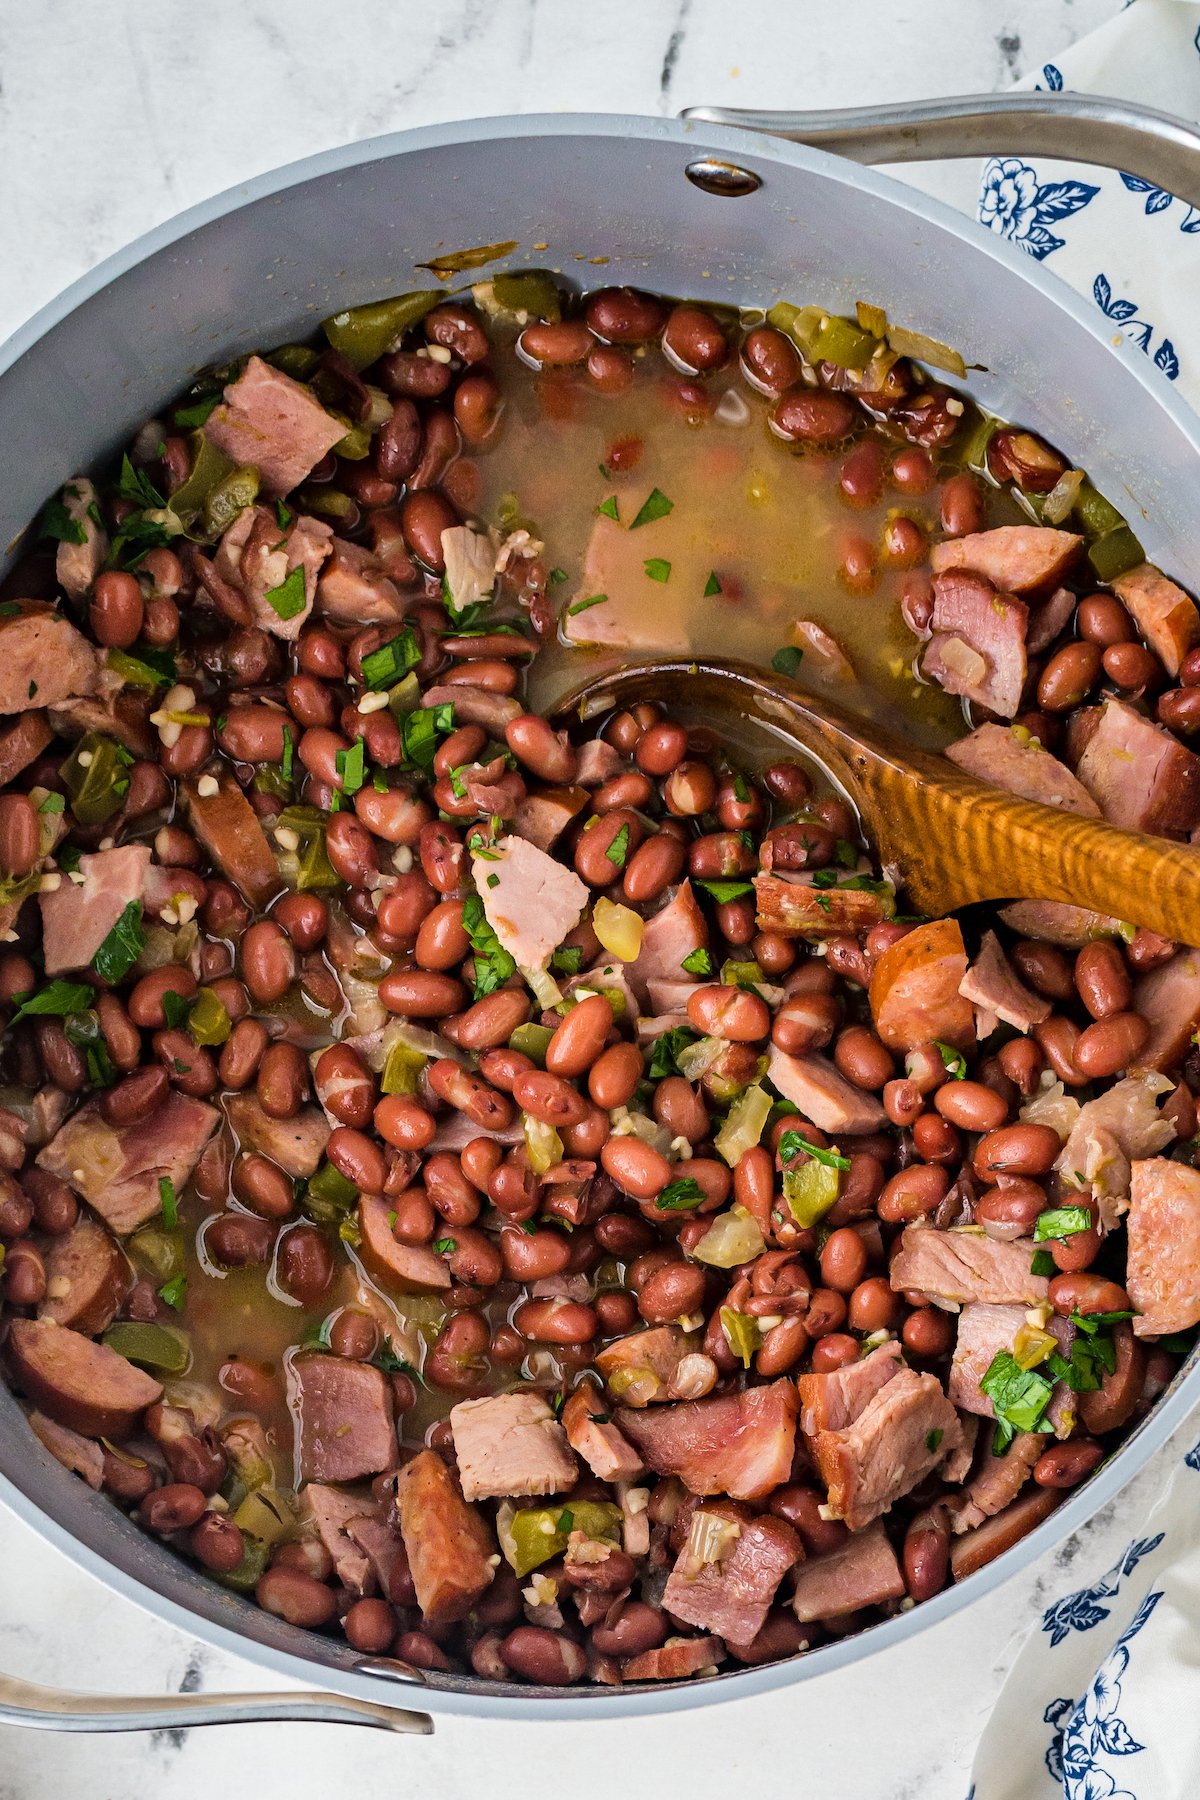 Red beans, ham, vegetables, and broth cooking in a large pot.